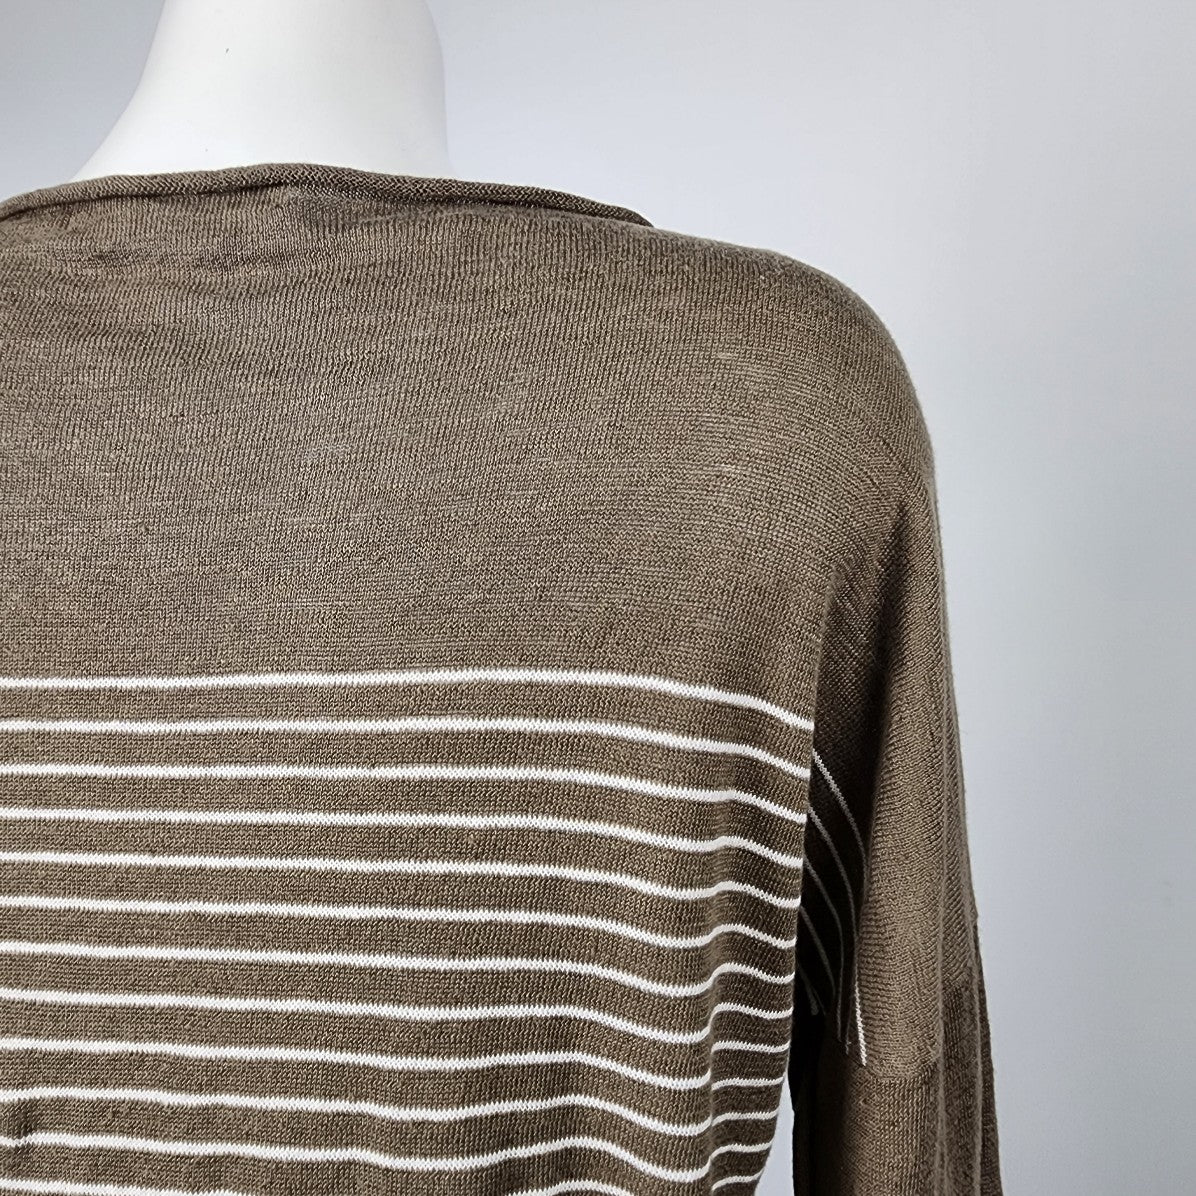 360 Sweater Olive Green Striped Linen Knit Top Size M